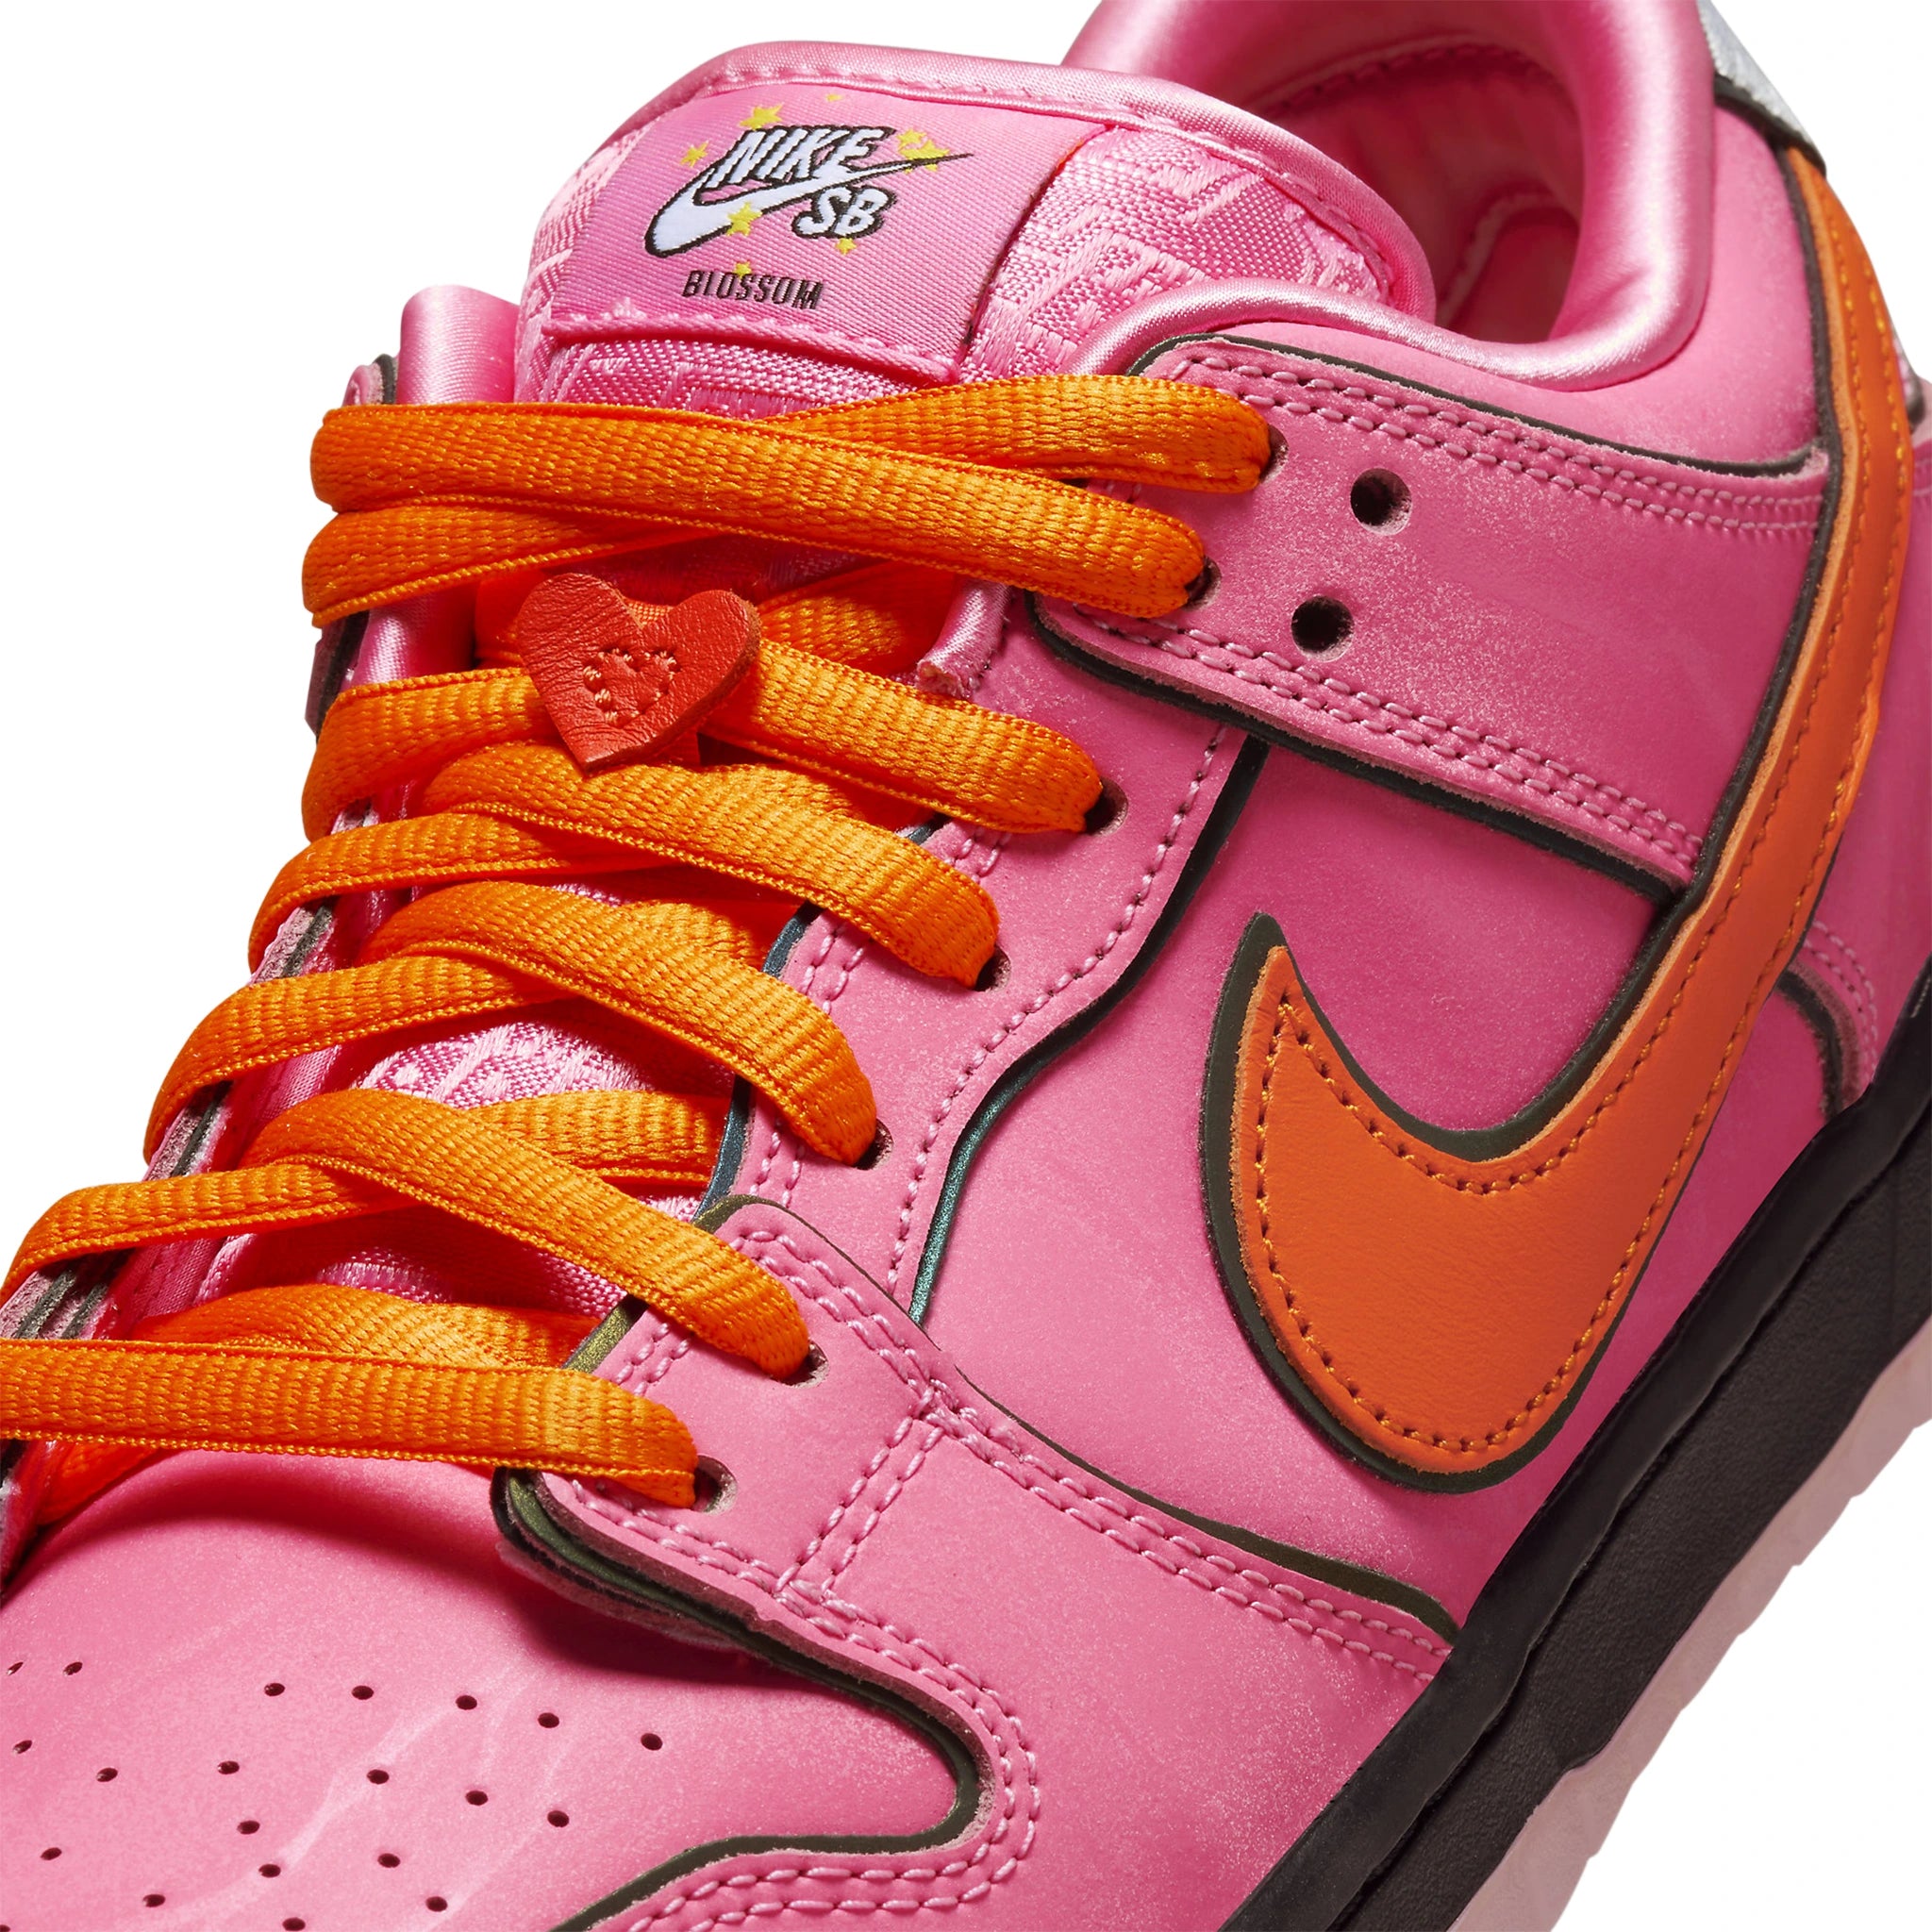 Tongue view of The Powerpuff Girls x Nike SB Dunk Low Blossom FD2631-600